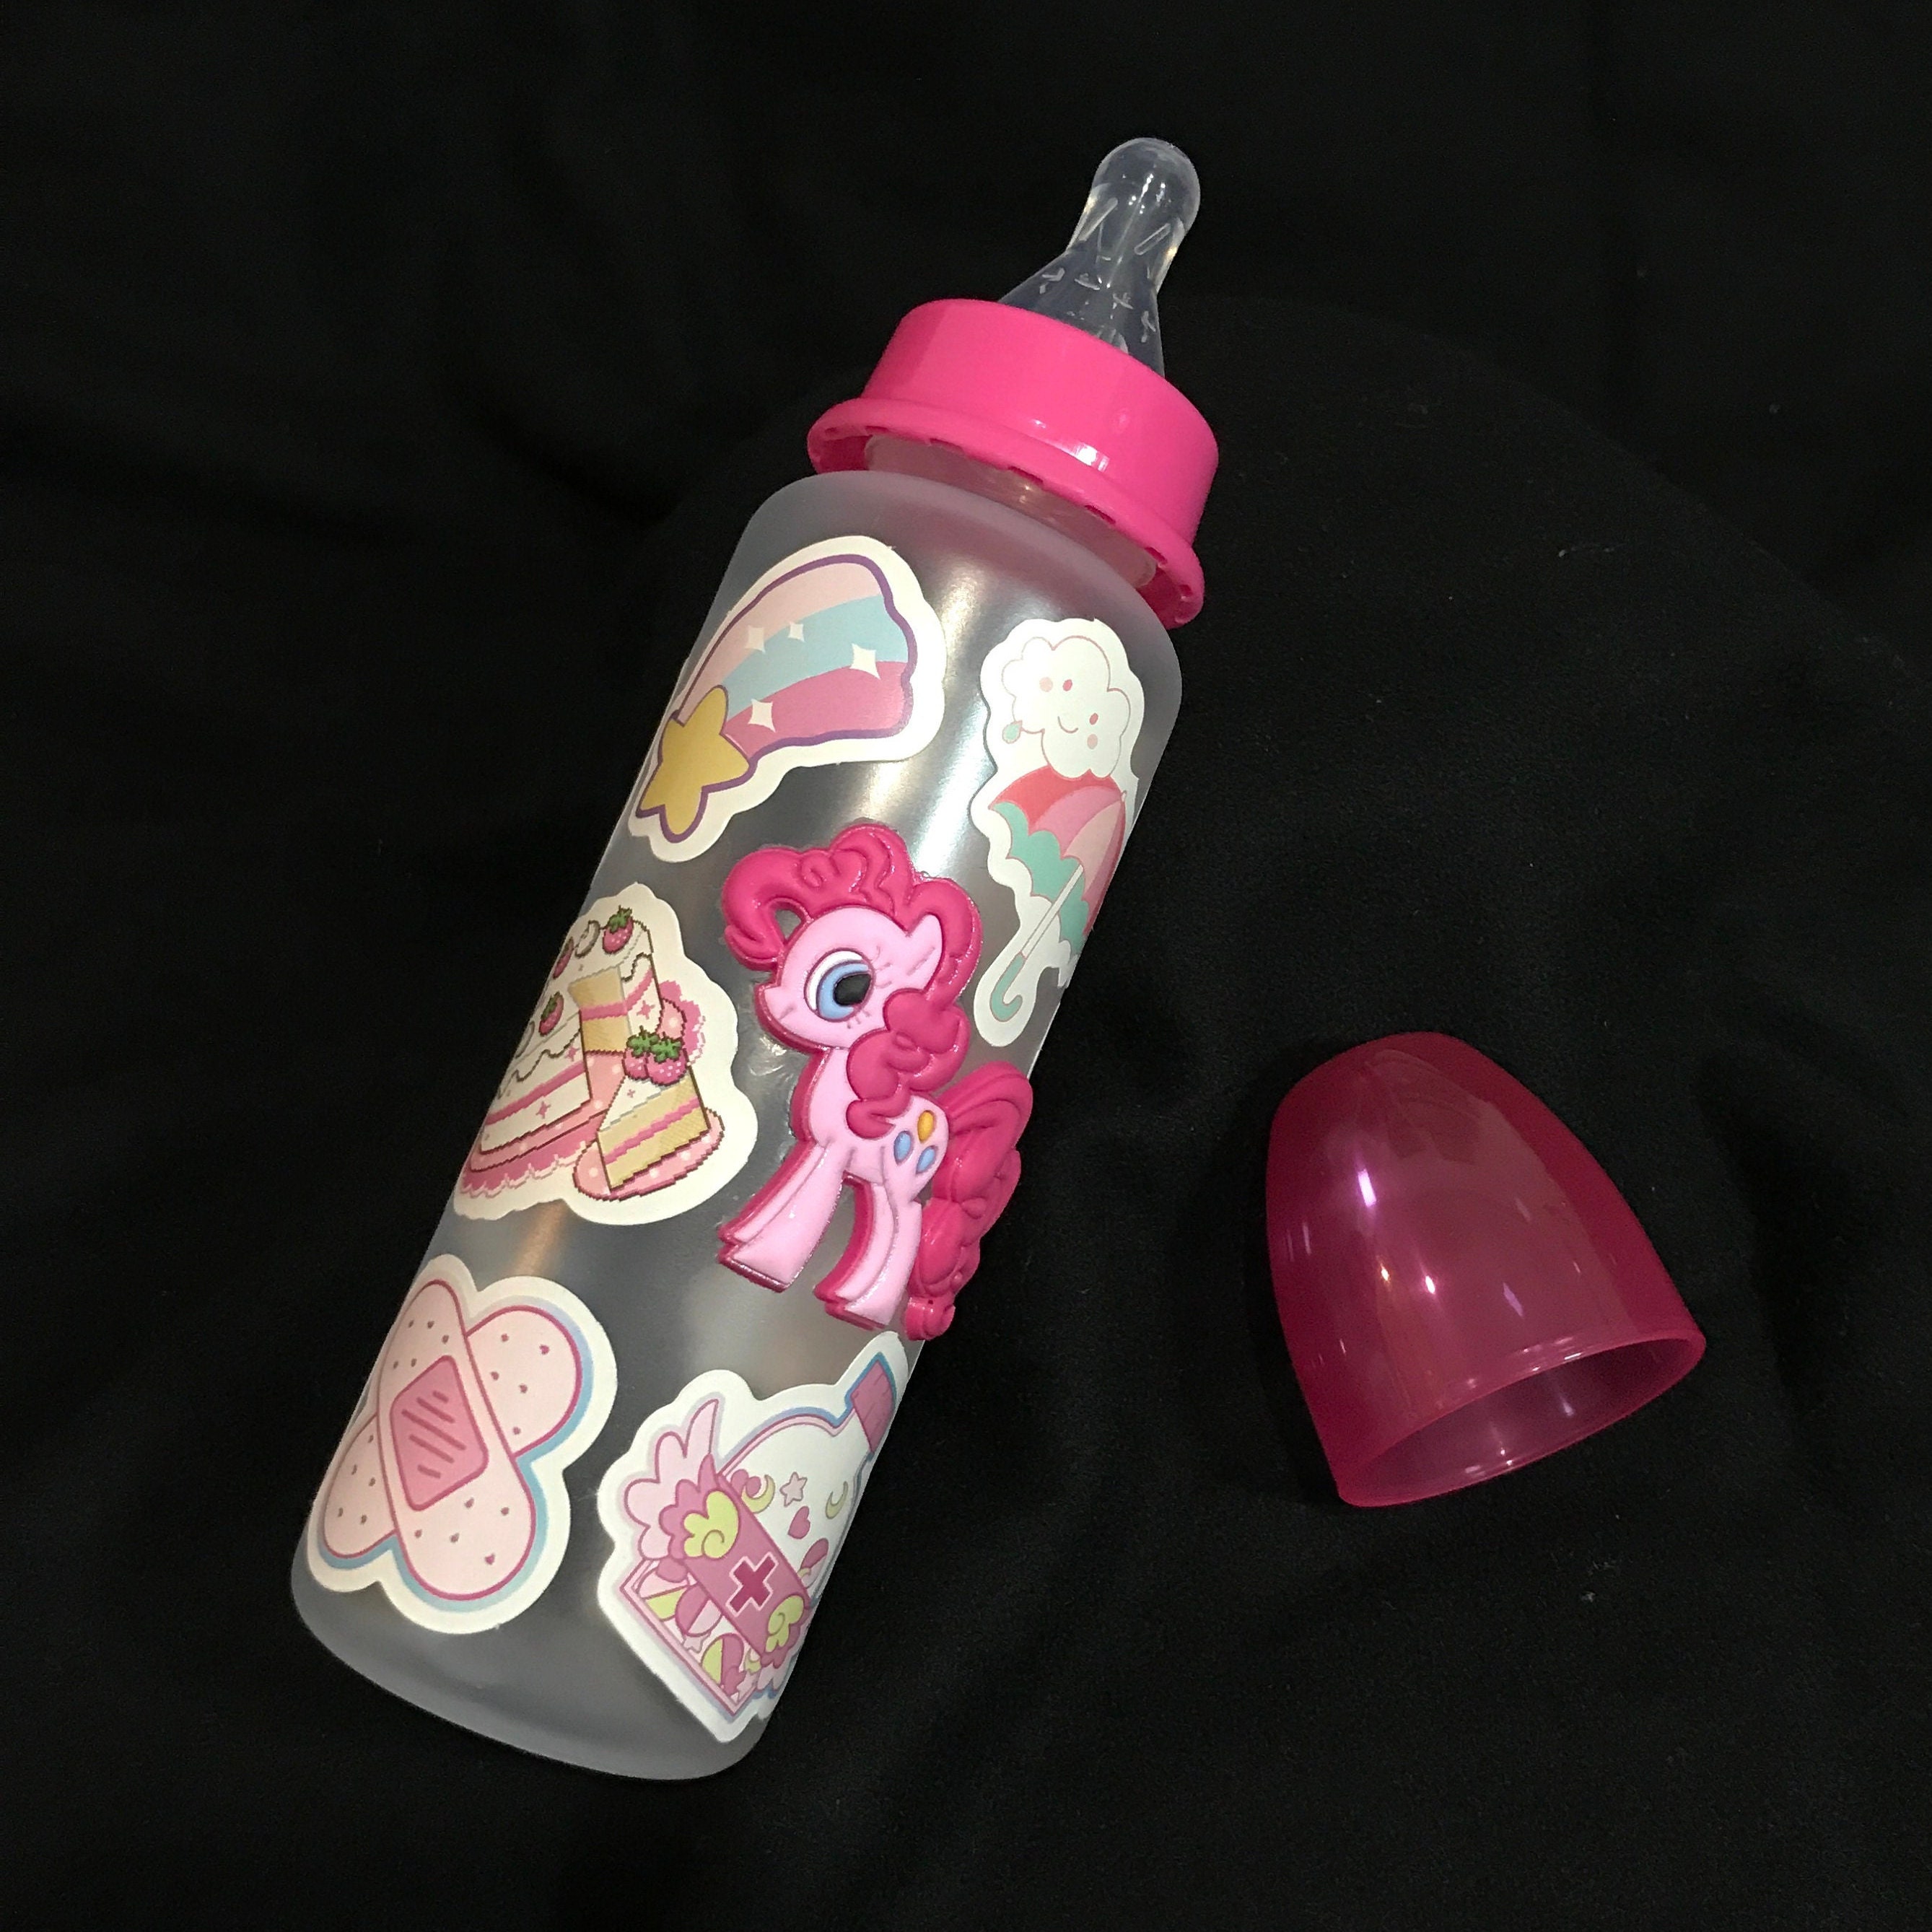 Adult Baby Bottle Made Raw Materials PP ABS – Kinky Cloth